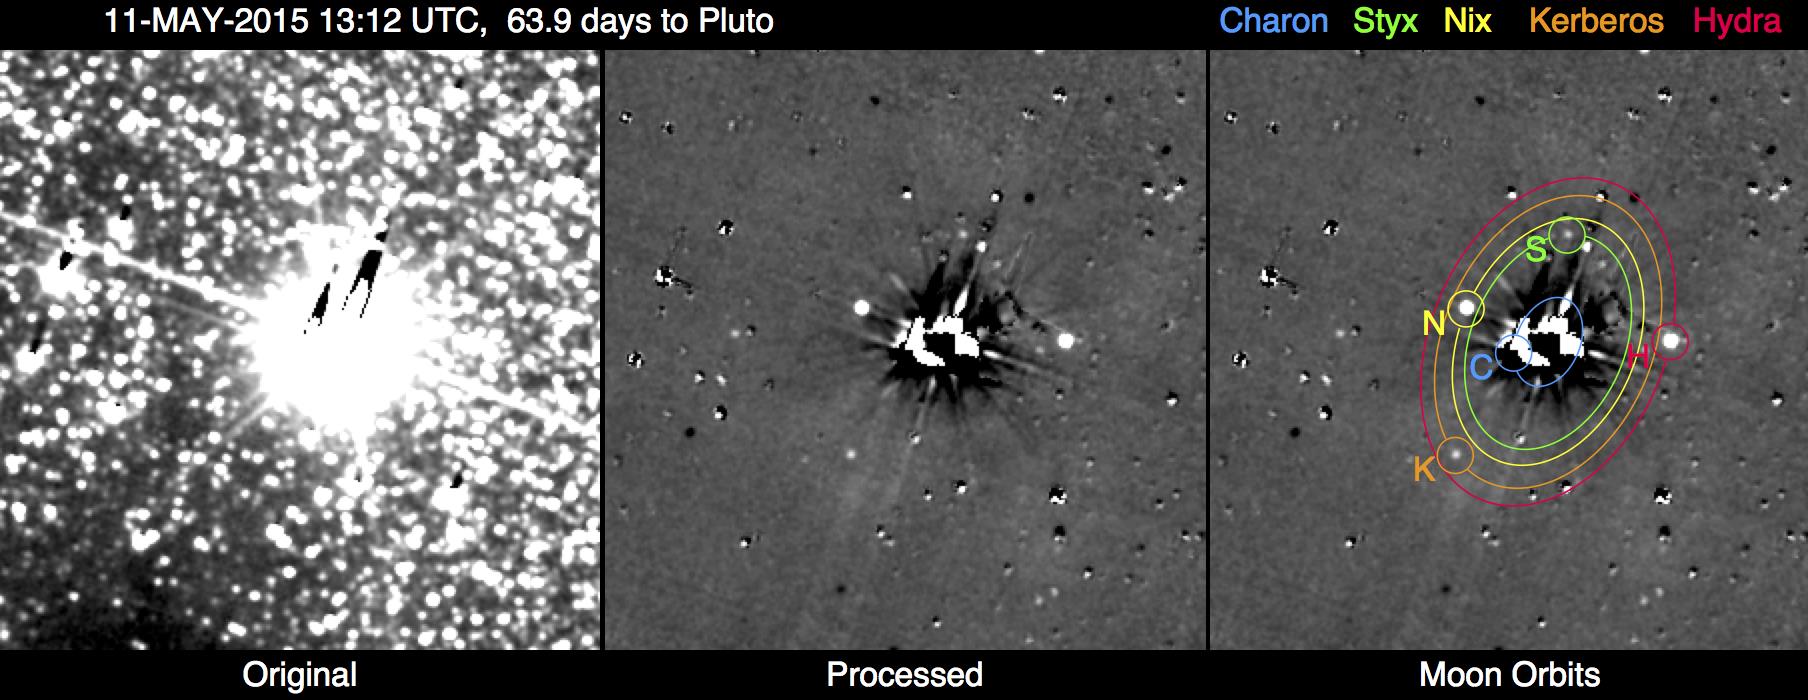 The New Horizons science team conducted a search for potentially hazardous material around Pluto, based on a total of 144 10-second exposures of the Pluto system that were taken by the spacecraft between May 11-12 from a distance of 76 million km away. The results indicated no immediate threat for the spacecraft this far. Image Credit: NASA/Johns Hopkins University Applied Physics Laboratory/Southwest Research Institute